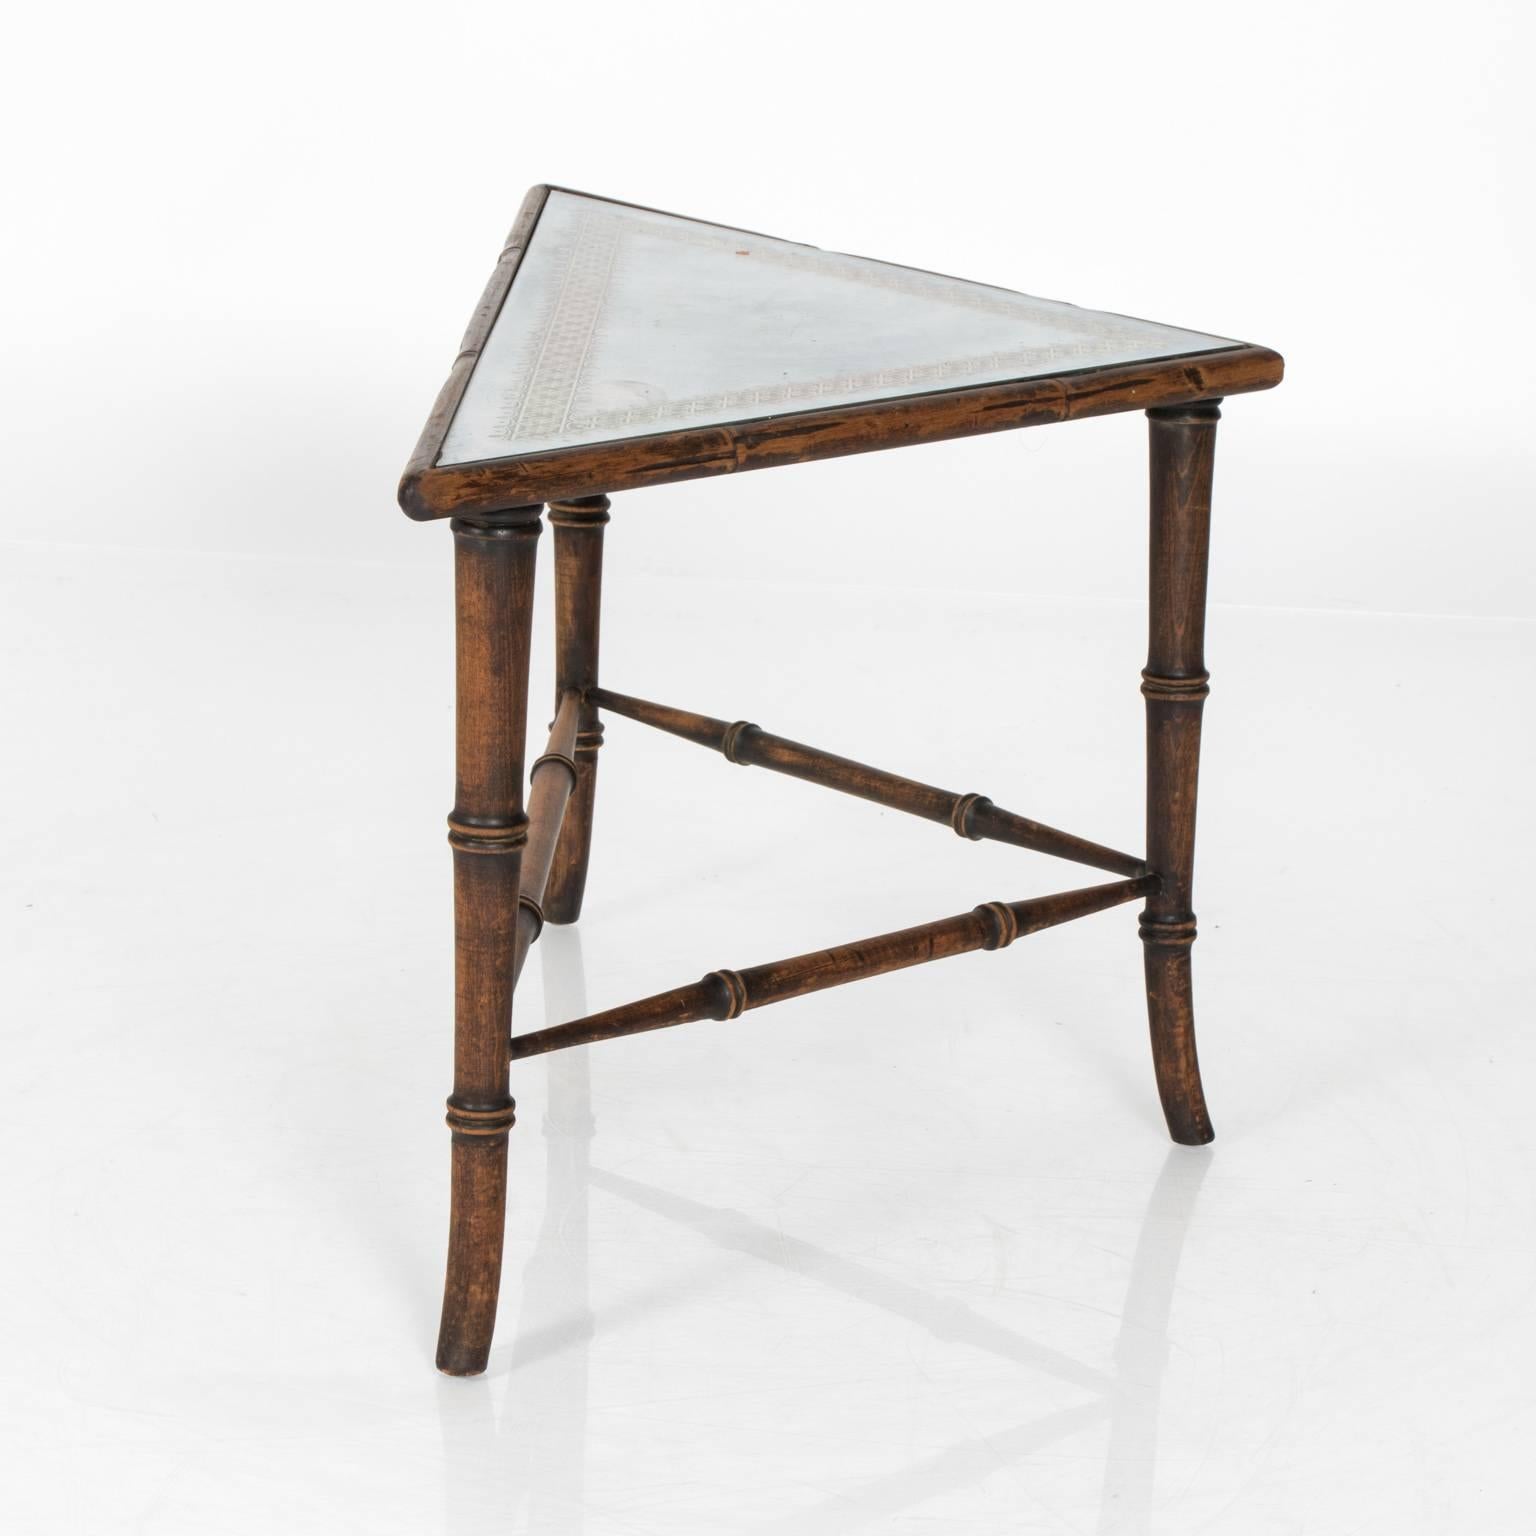 Pair of early 20th century English triangular bamboo side tables with etched mirrored tops.
 